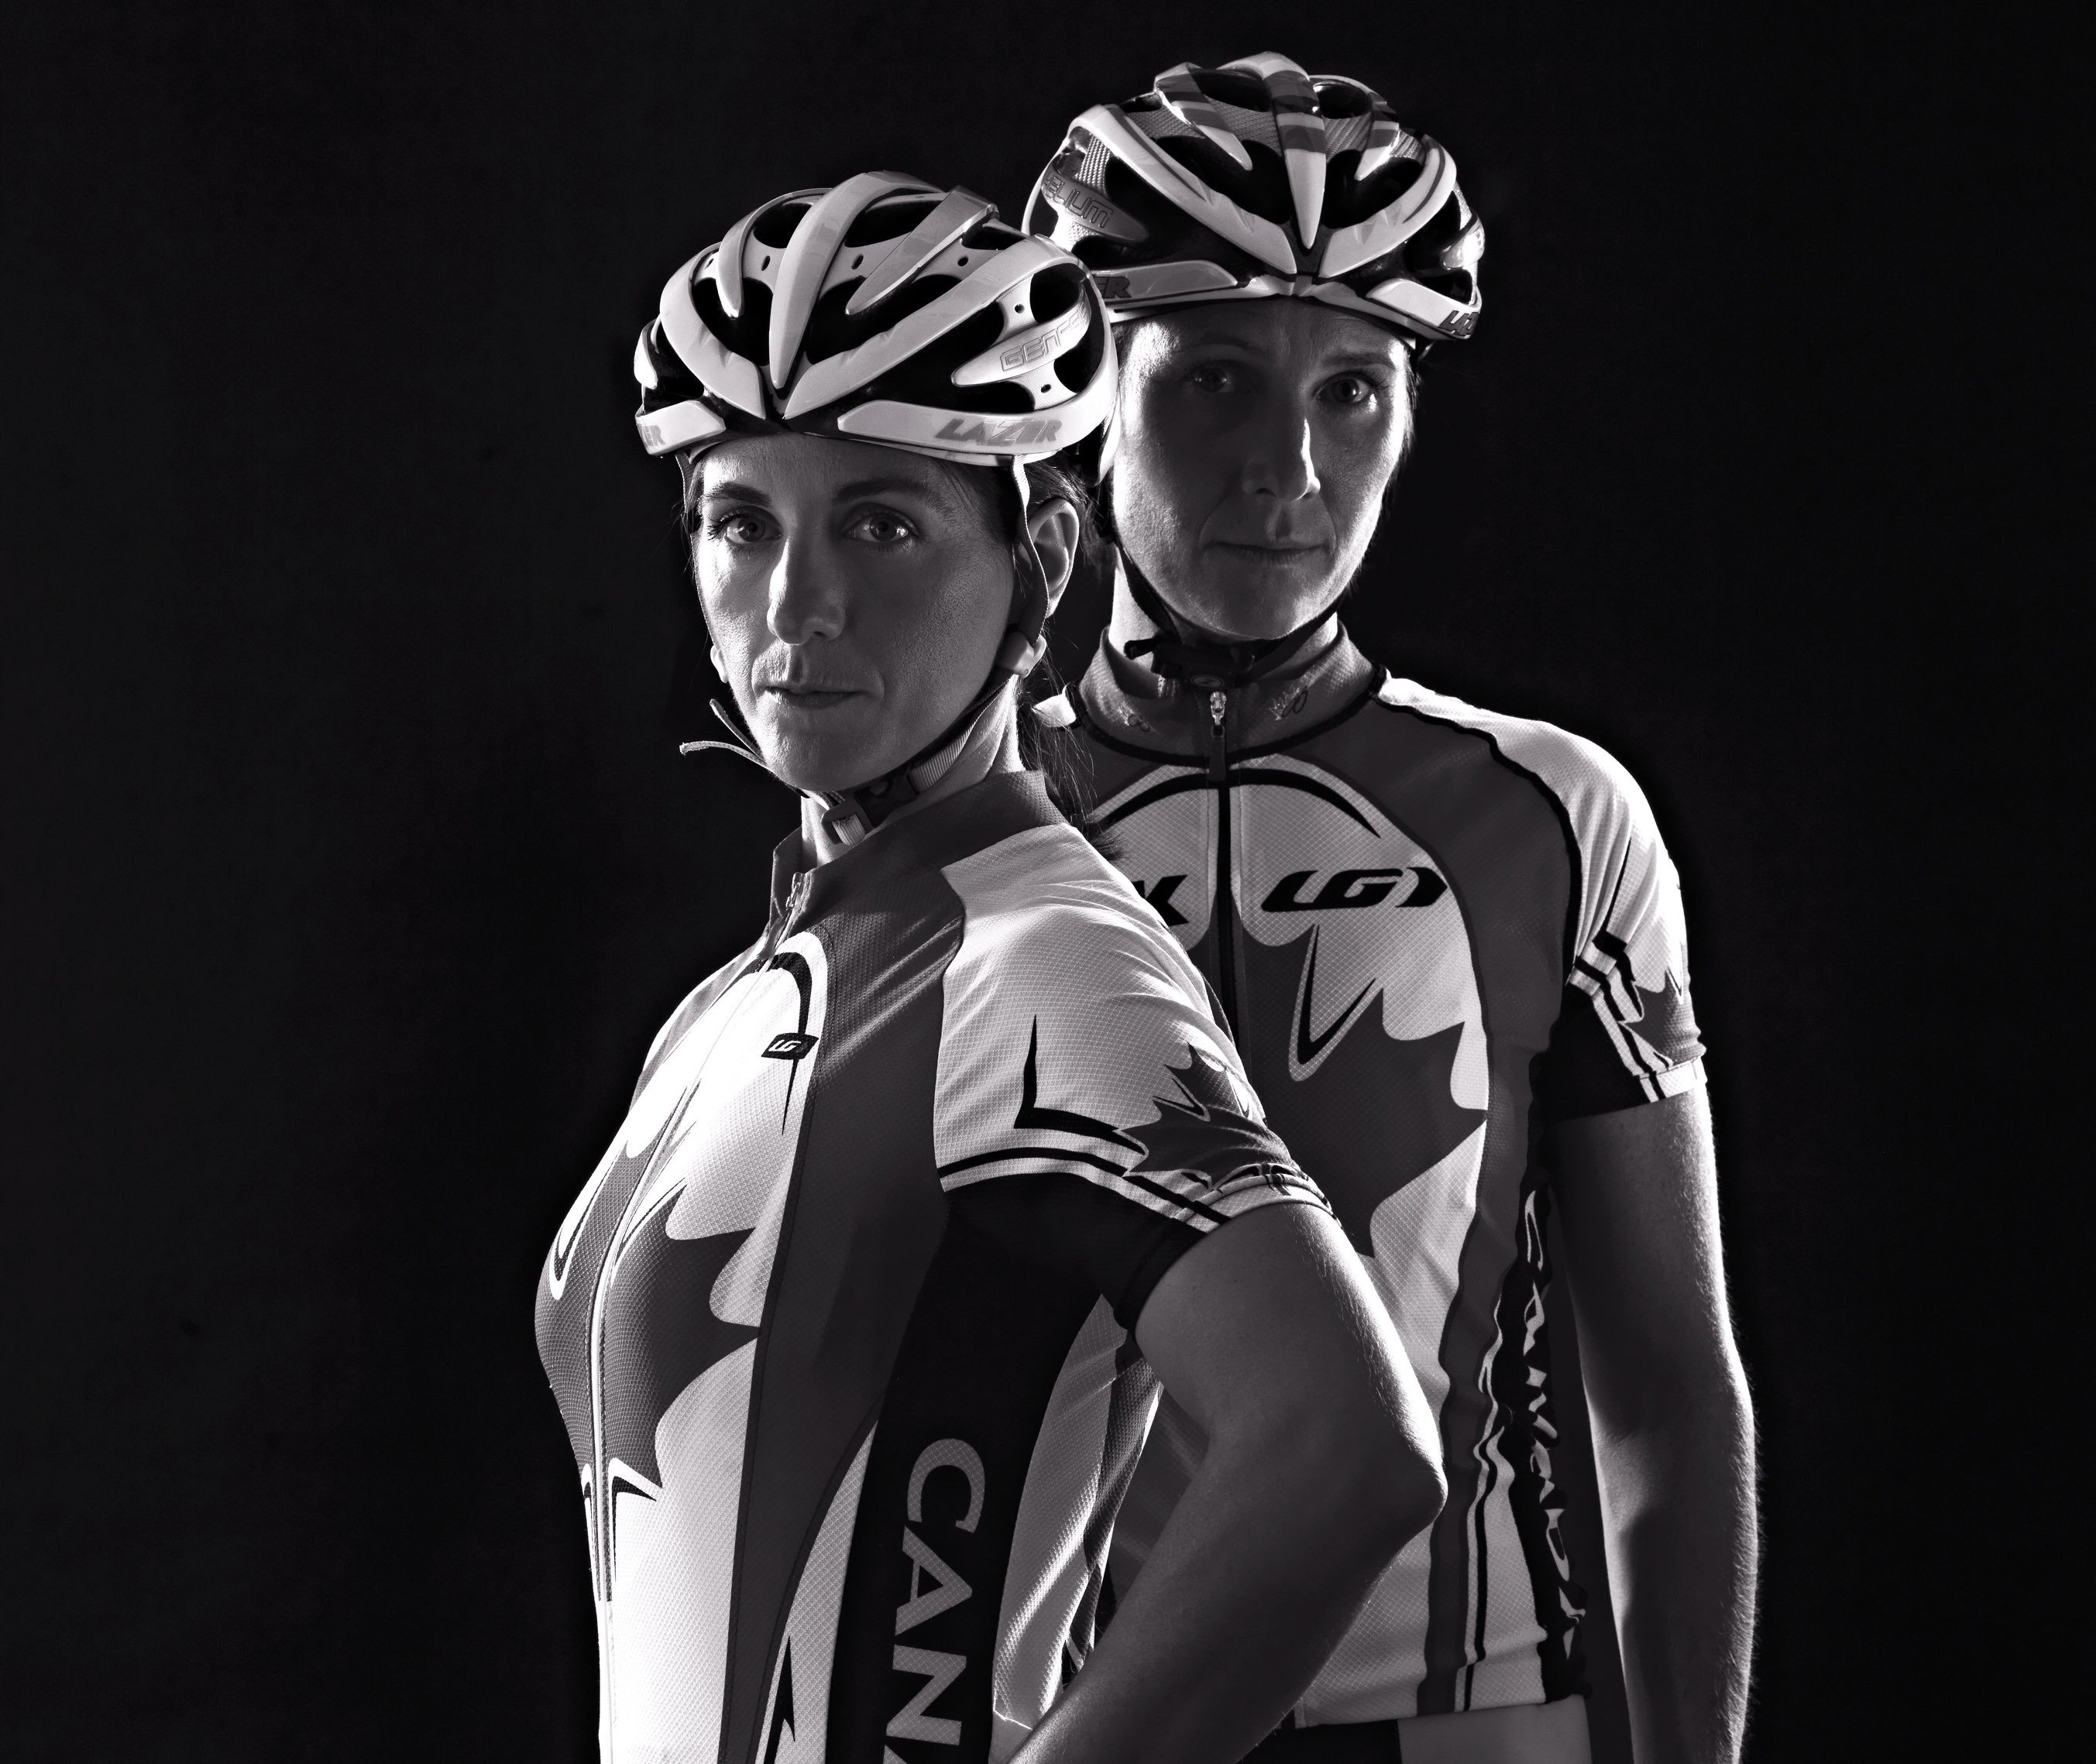 Robbi Weldon in cycling gear standing with tandem bike partner